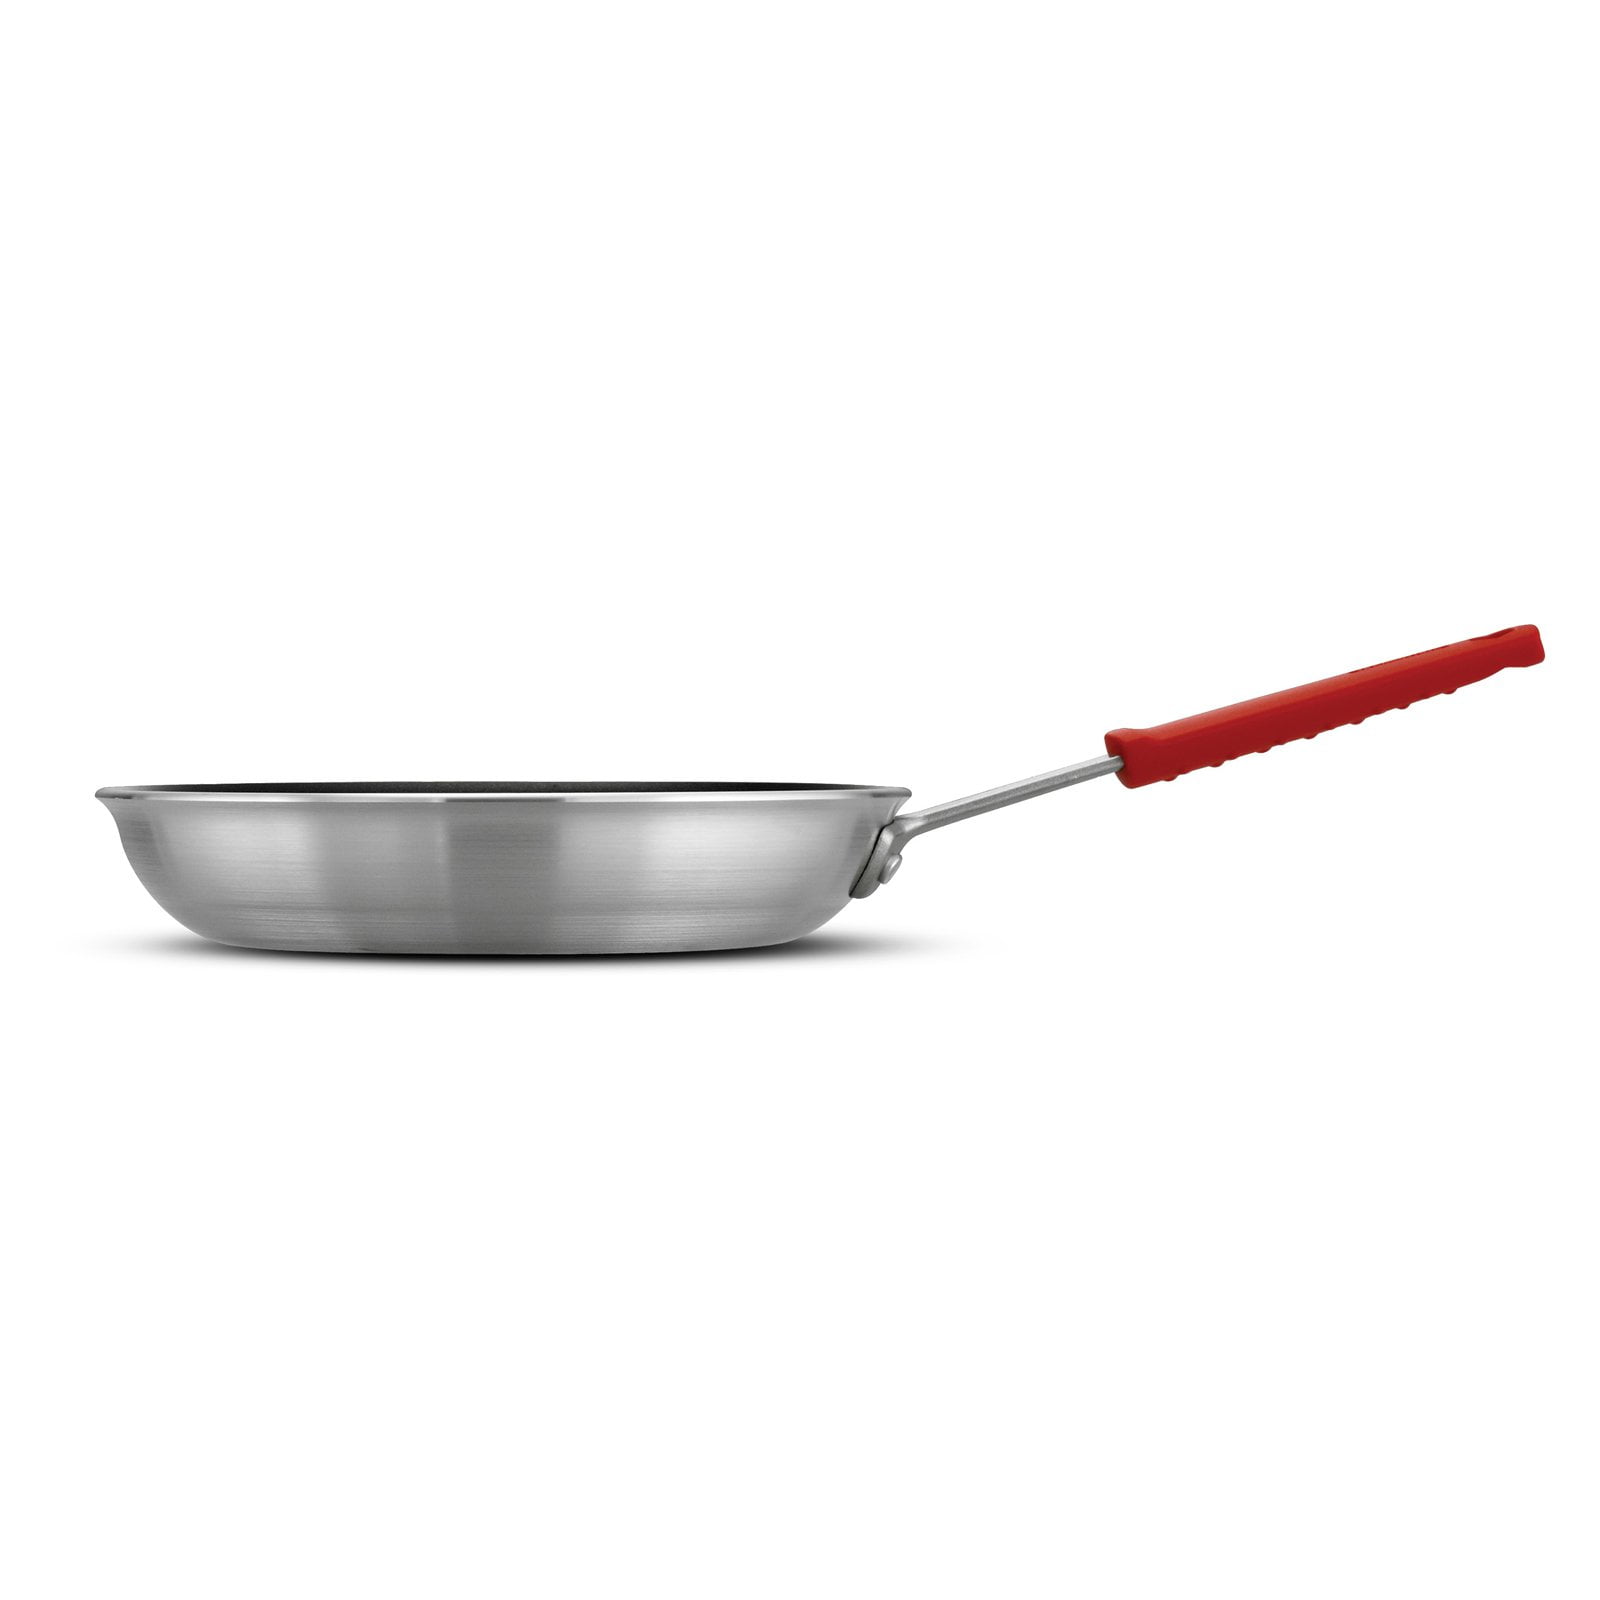 Tramontina Commercial 8 Non-Stick Restaurant Fry Pan 